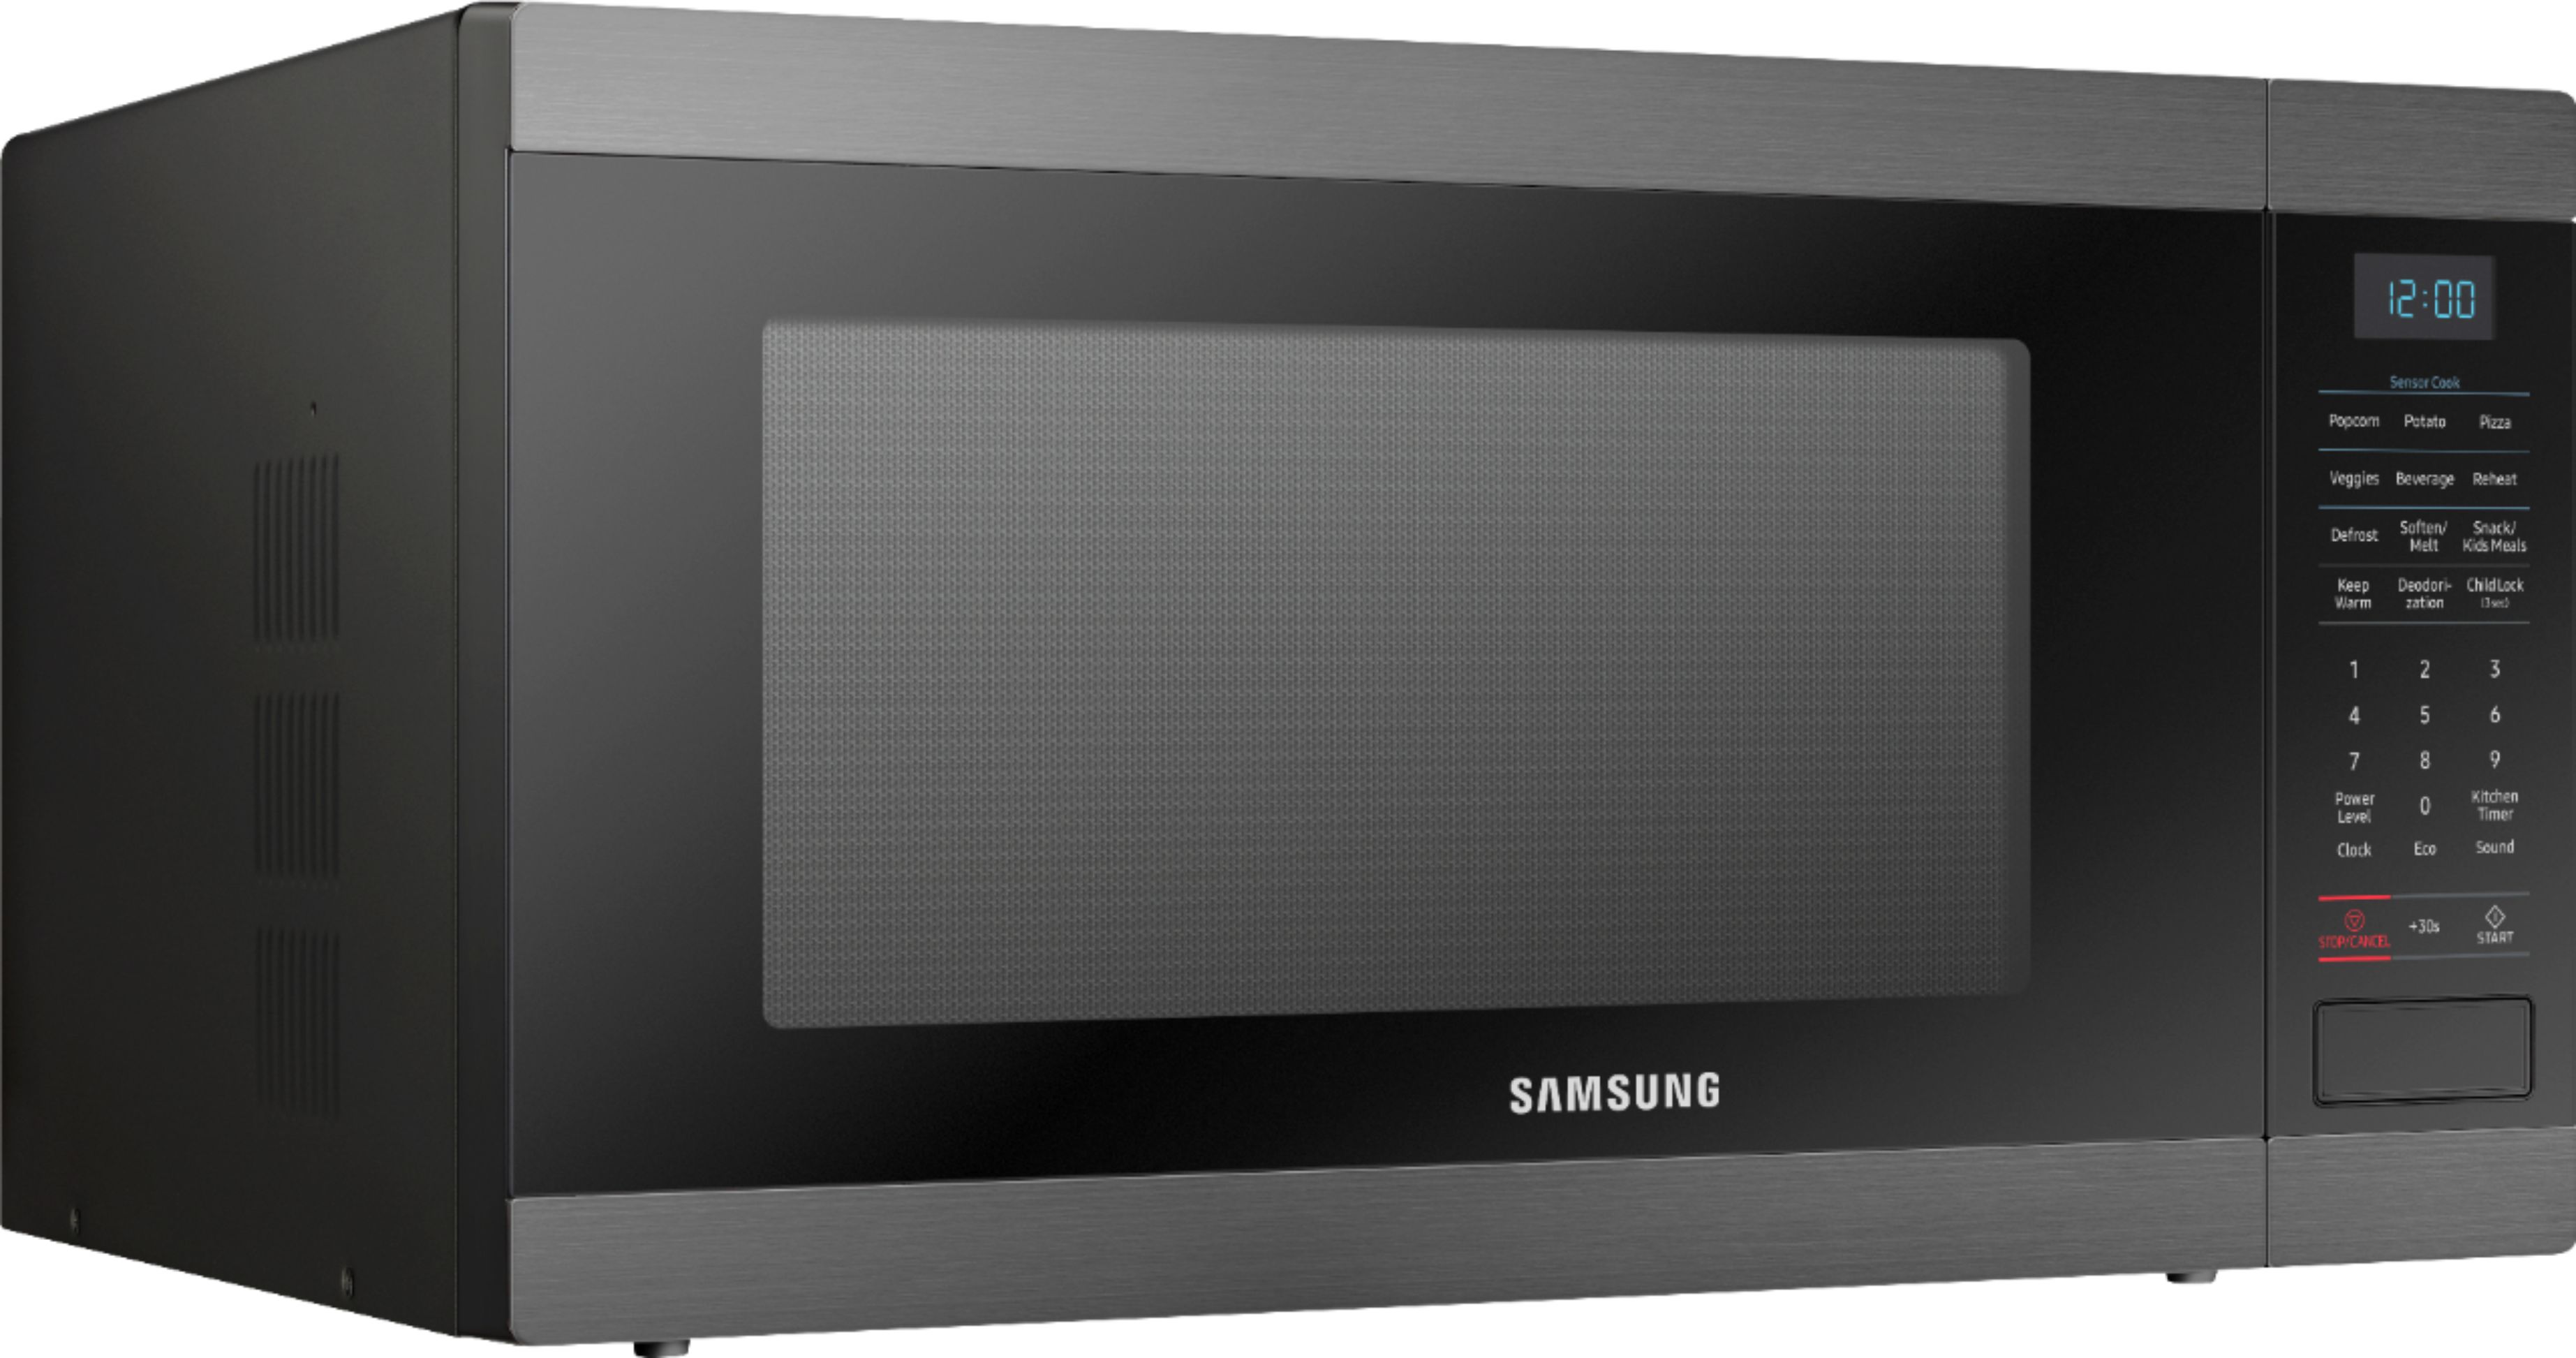 Angle View: LG - 1.8 Cu. Ft. Over-the-Range Microwave with Sensor Cooking and EasyClean - Stainless steel